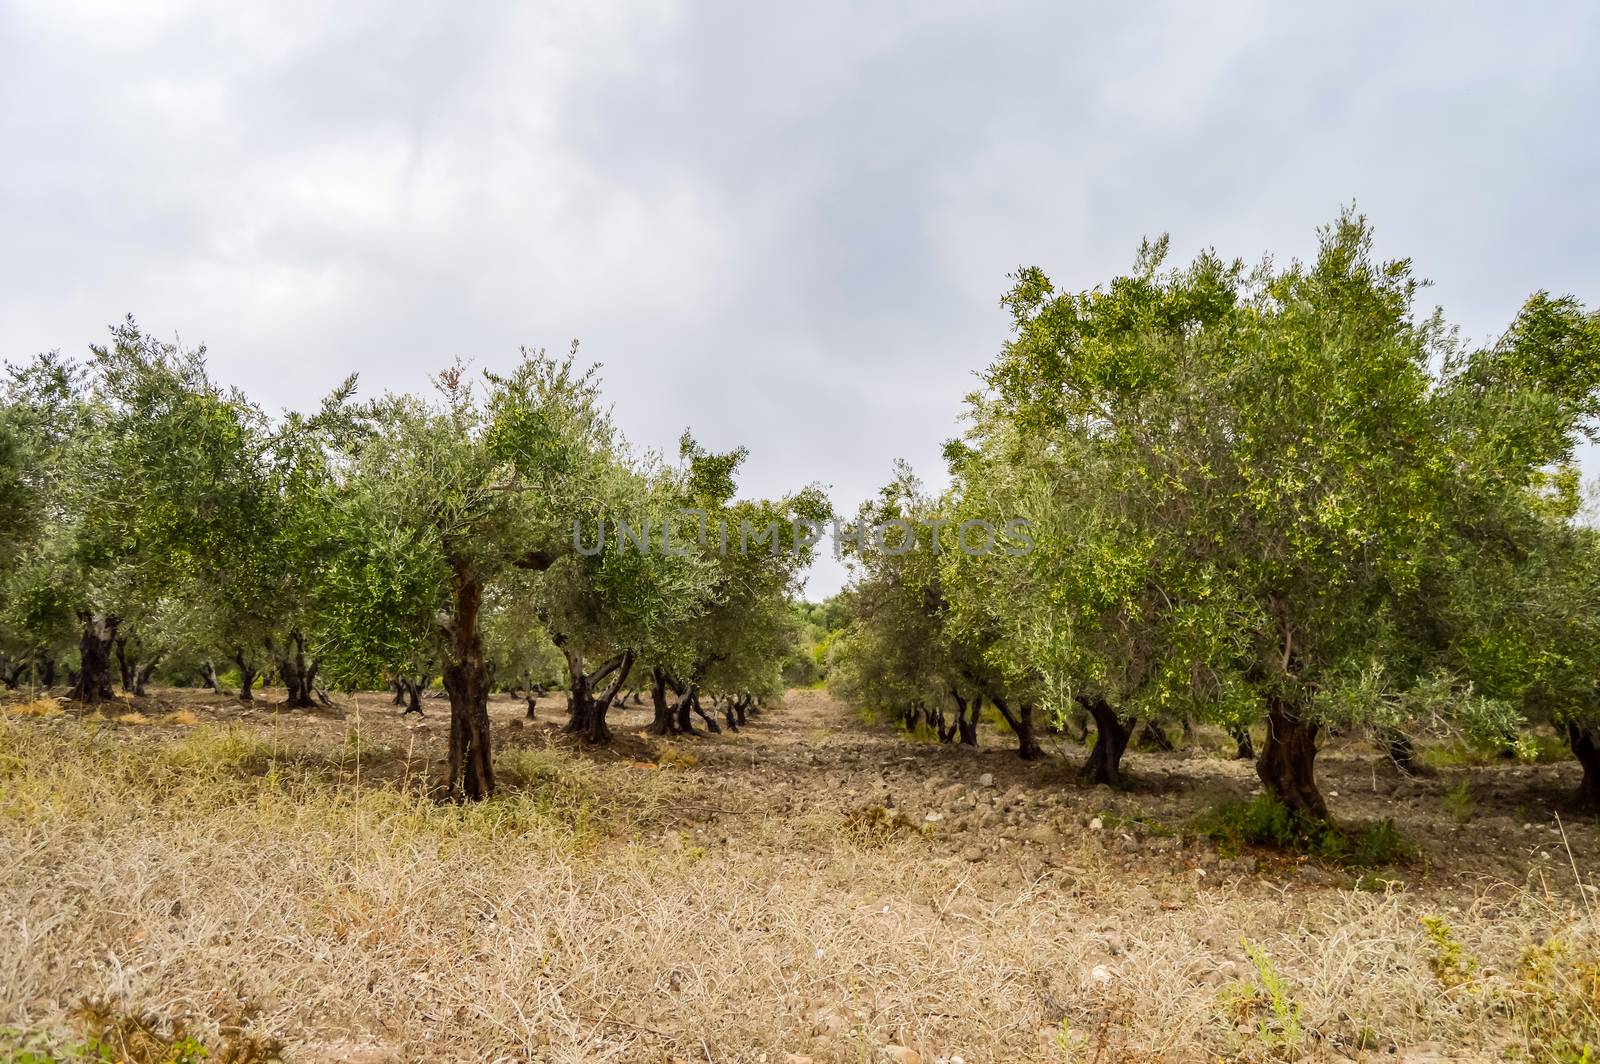 Olive plantation in Crete, the island of olive trees by Philou1000